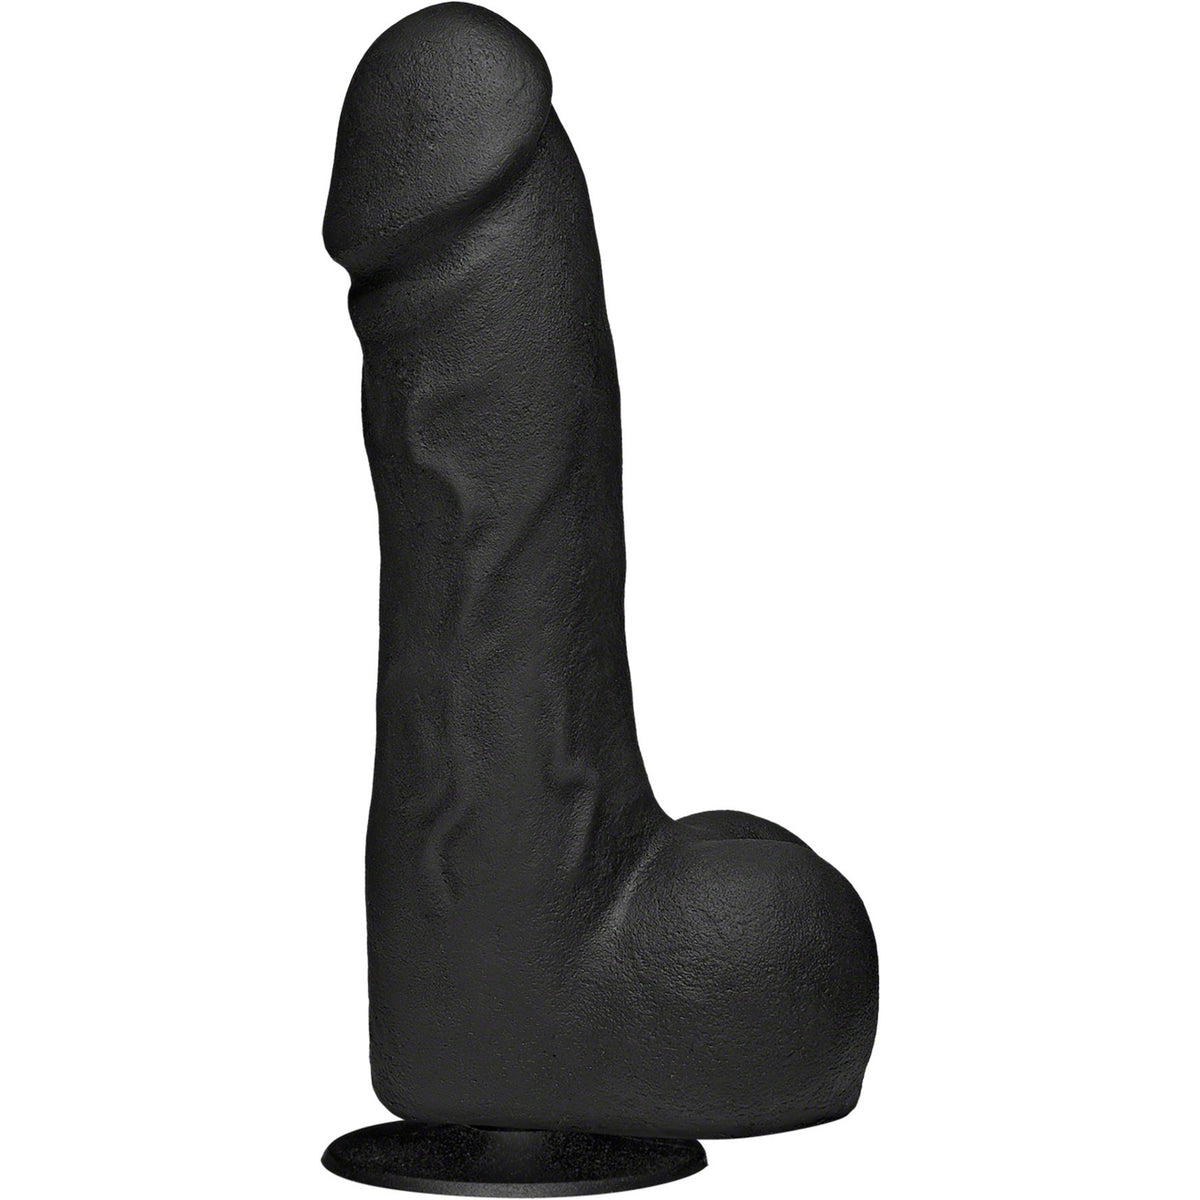 Doc Johnson Kink - The Perfect Cock 7.5 Inch with Removable Vac-U-Lock Suction